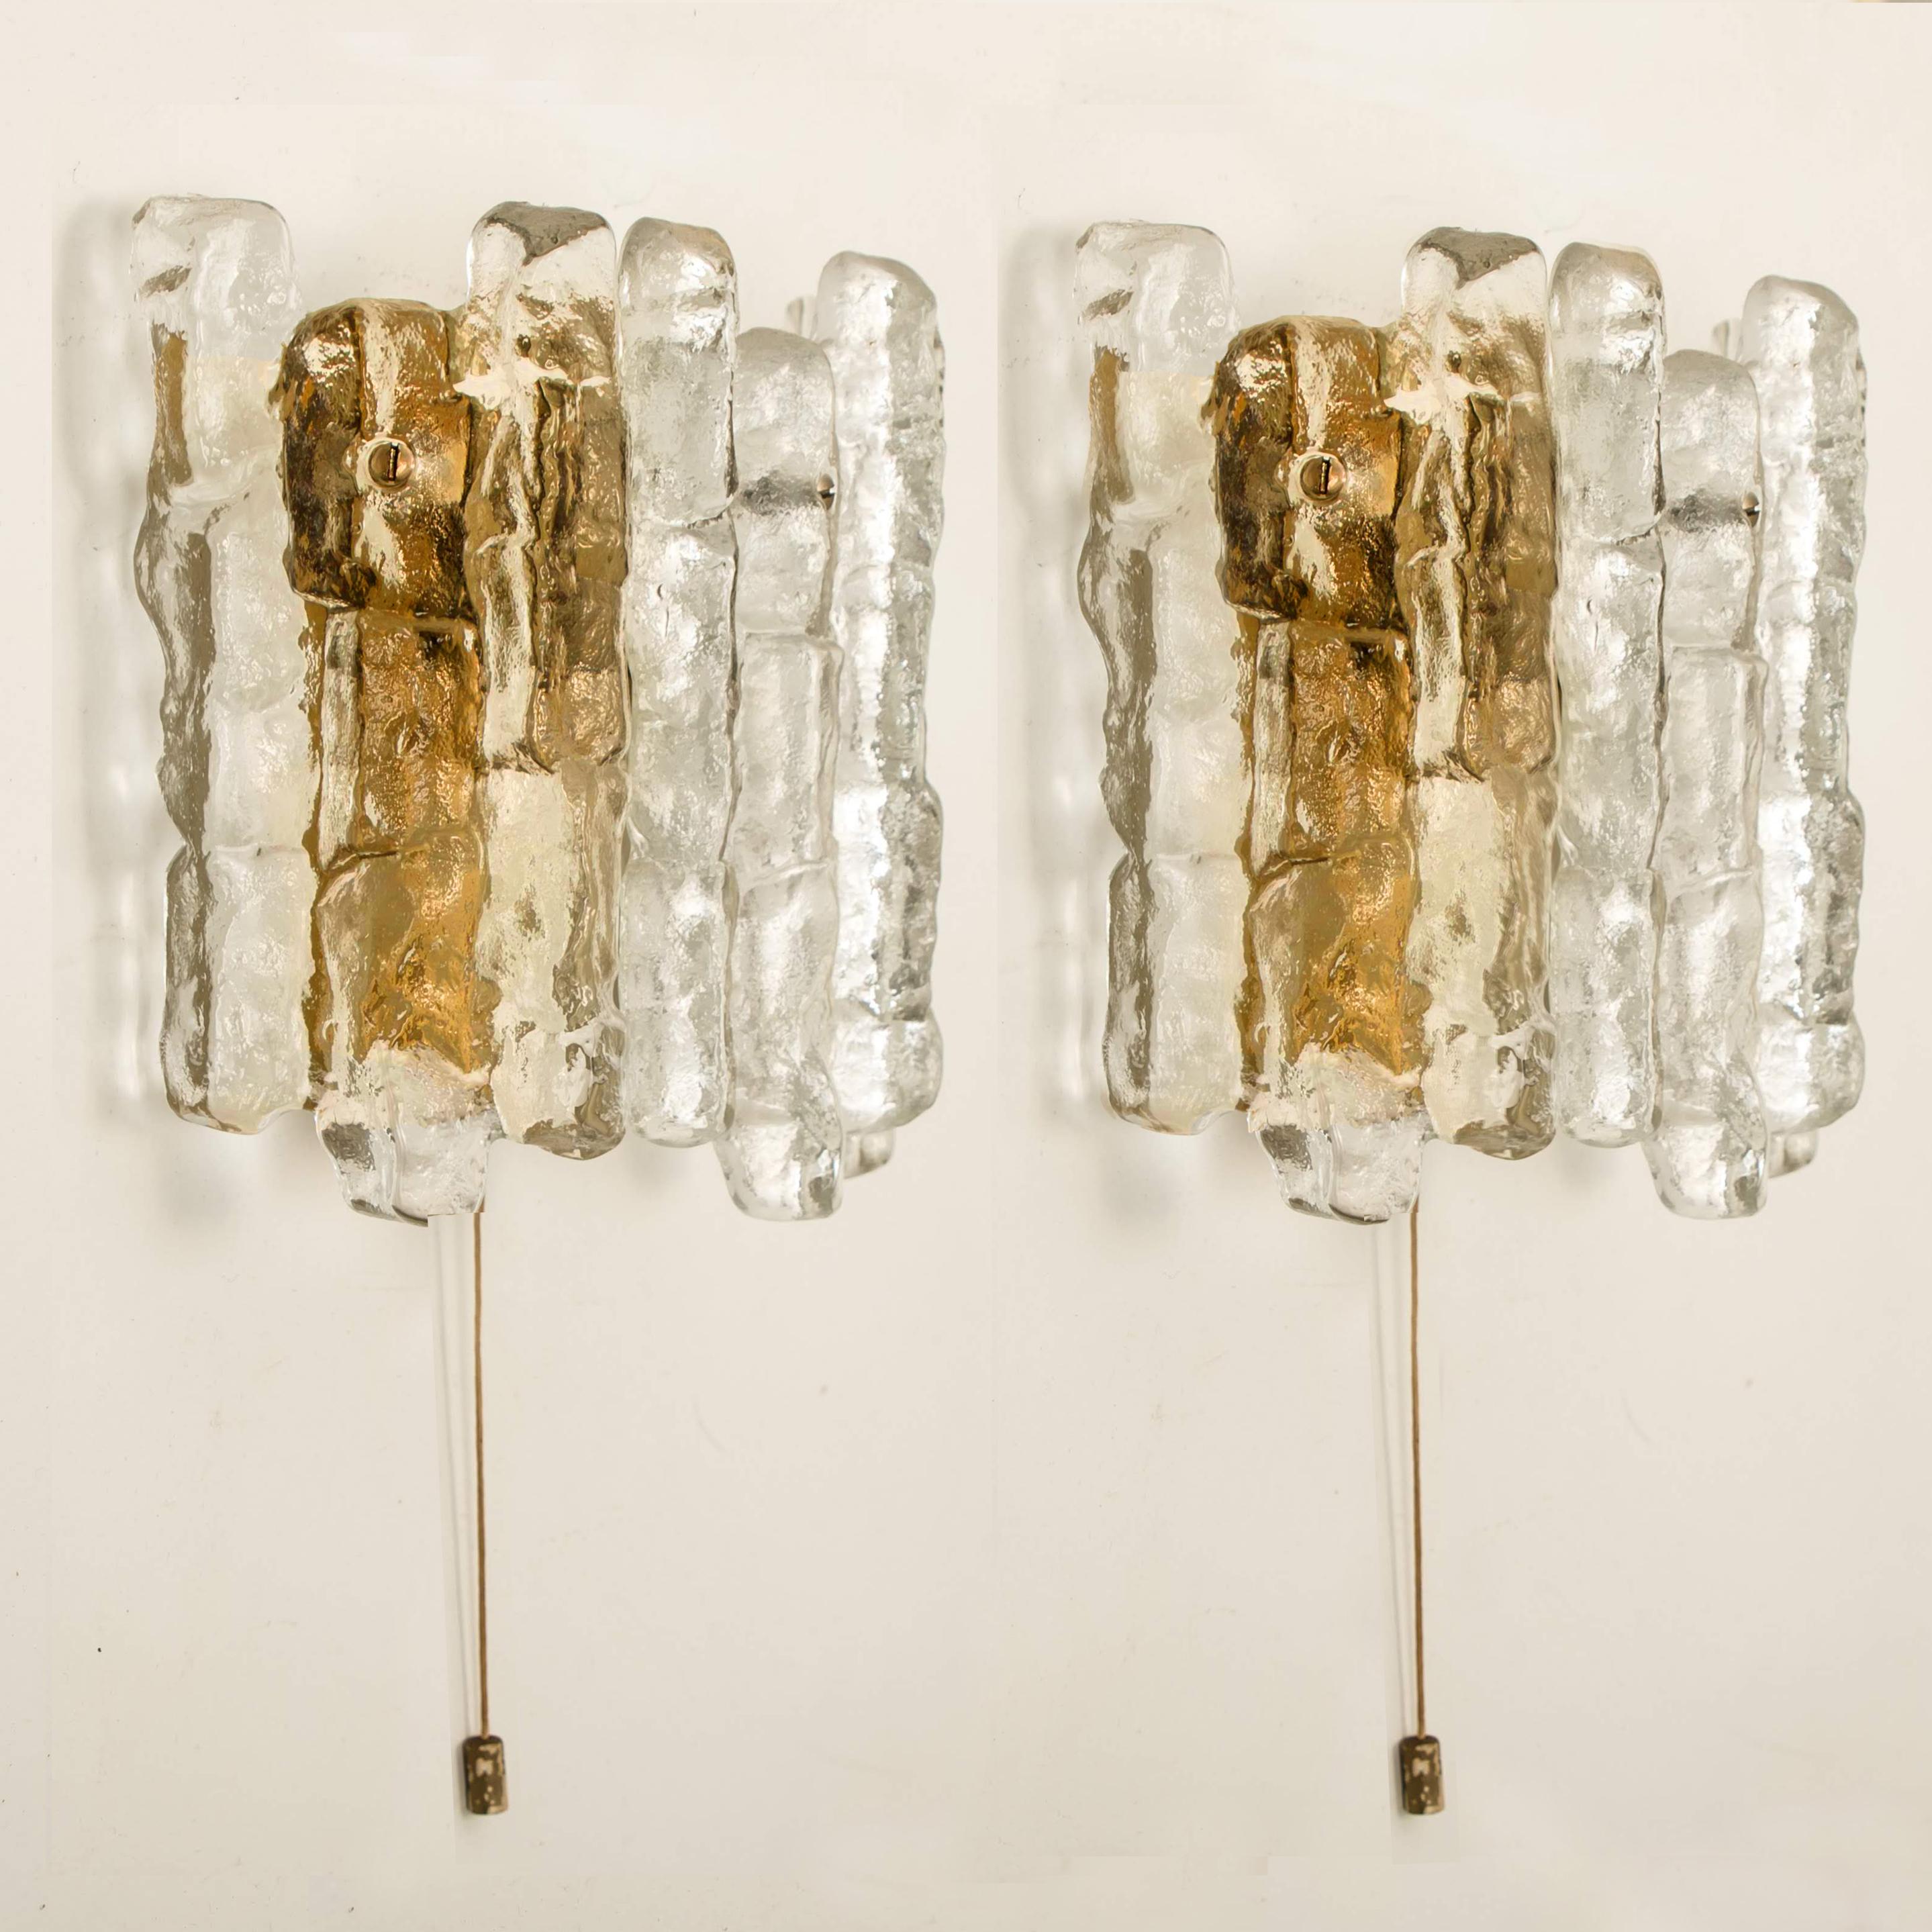 Set of 6 beautiful and elegant modern brass toned wall lights or sconces, manufactured by J.T. Kalmar Austria in the 1970s. Lovely design, executed to a very high standard. 

Each wall light has three solid ice glass sheets dangling on it. Clean